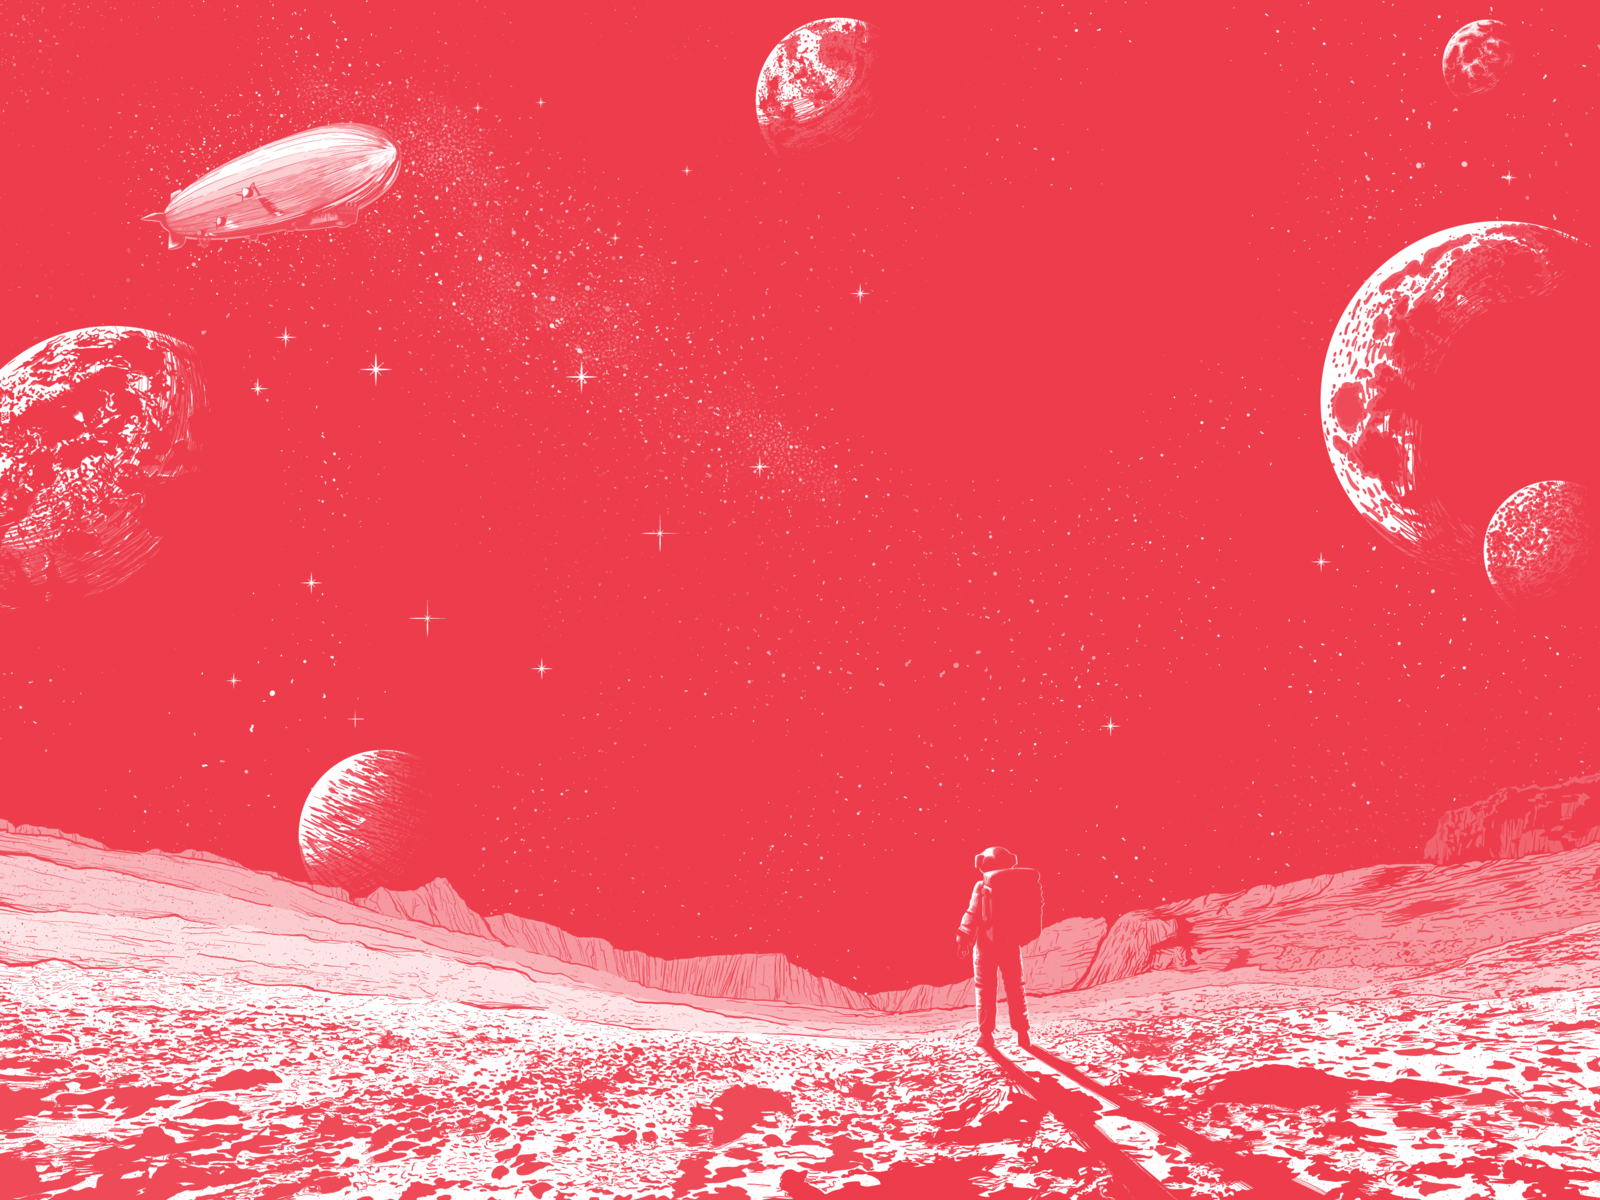 Red Space astronaut background comic galaxy illustration illustrator planet red space stars zeppelin